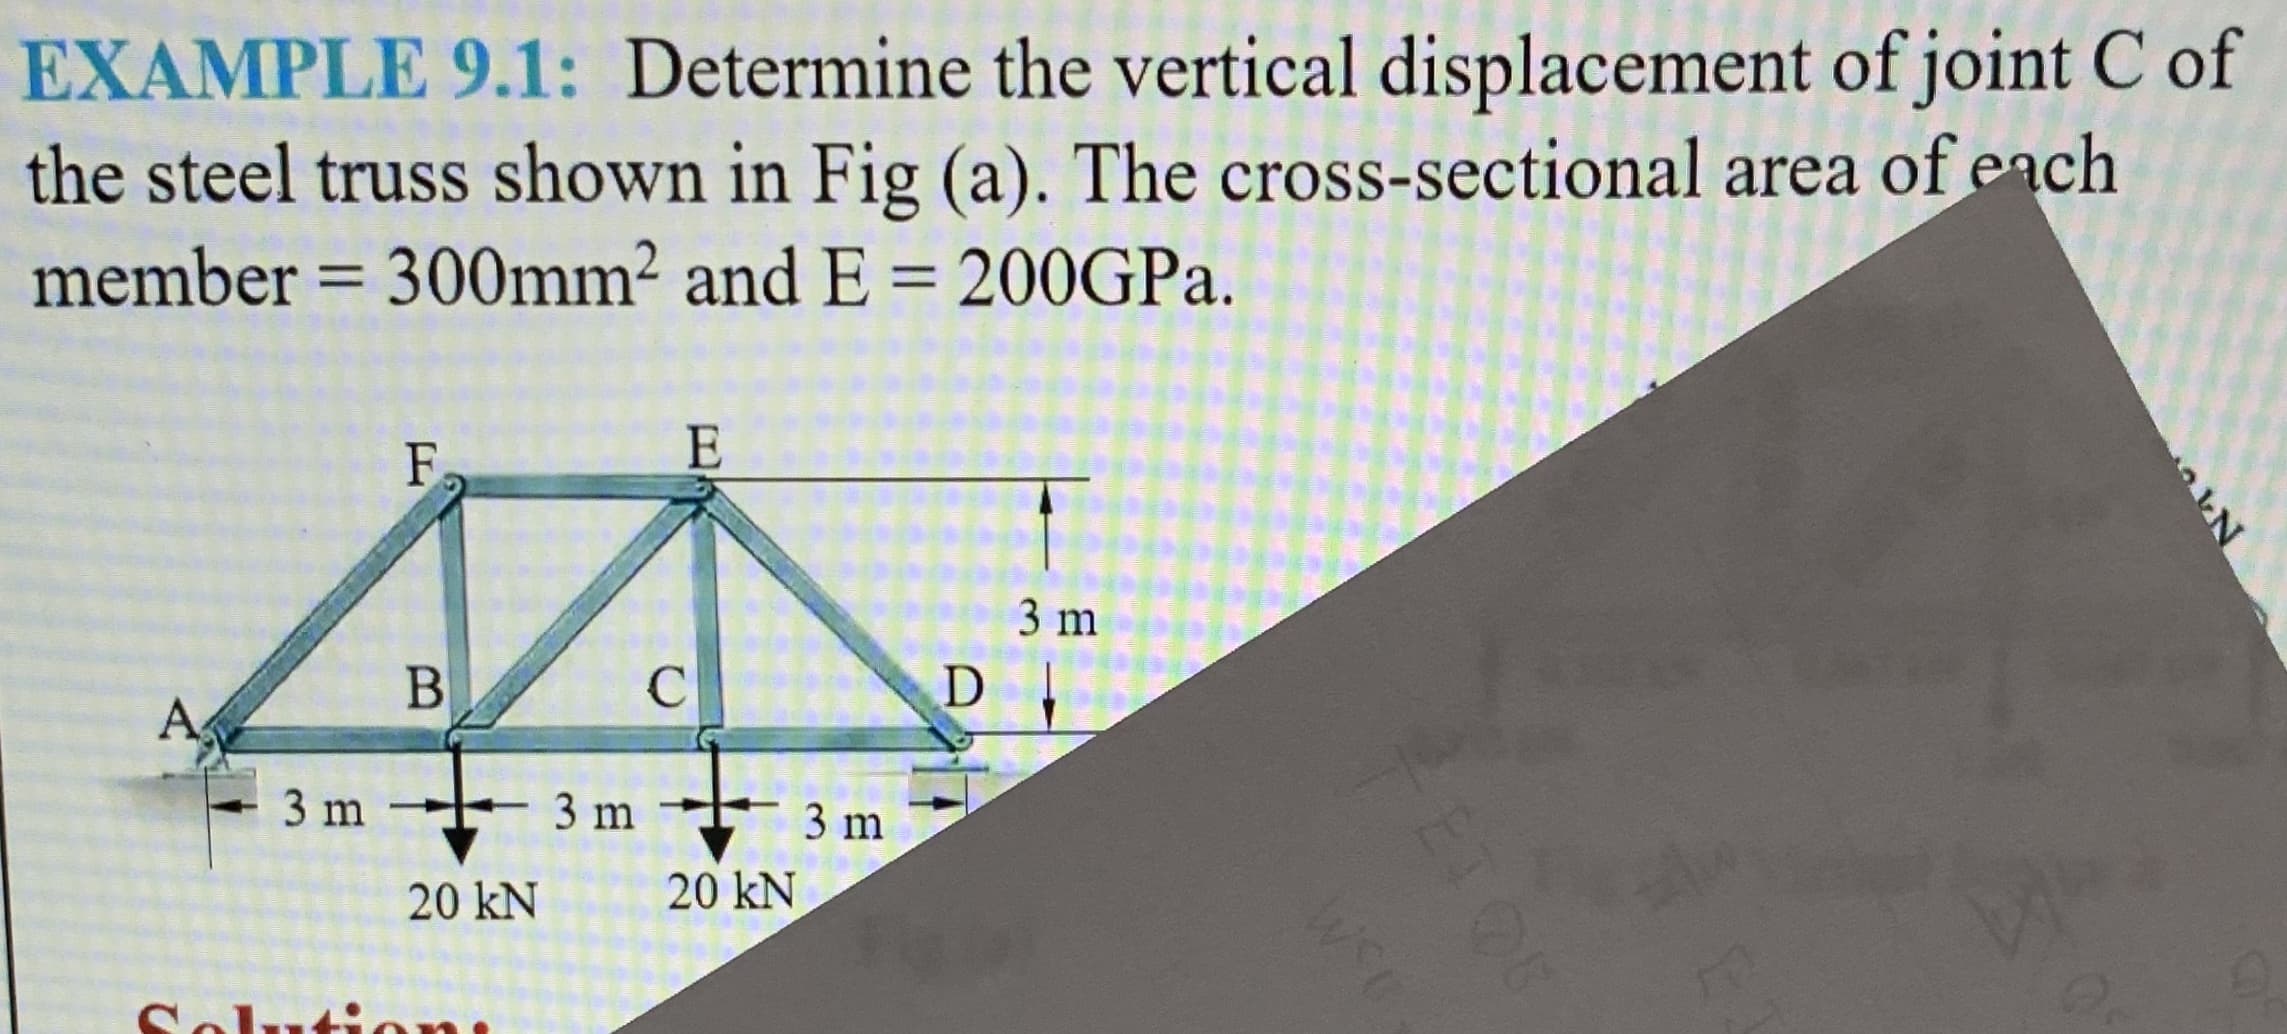 EXAMPLE 9.1: Determine the vertical displacement of joint C of
the steel truss shown in Fig (a). The cross-sectional area of each
member = 300mm² and E = 200GPA.
F.
E
3 m
B
D
A
3 m
3 m
3 m
20 kN
20 kN
ET
